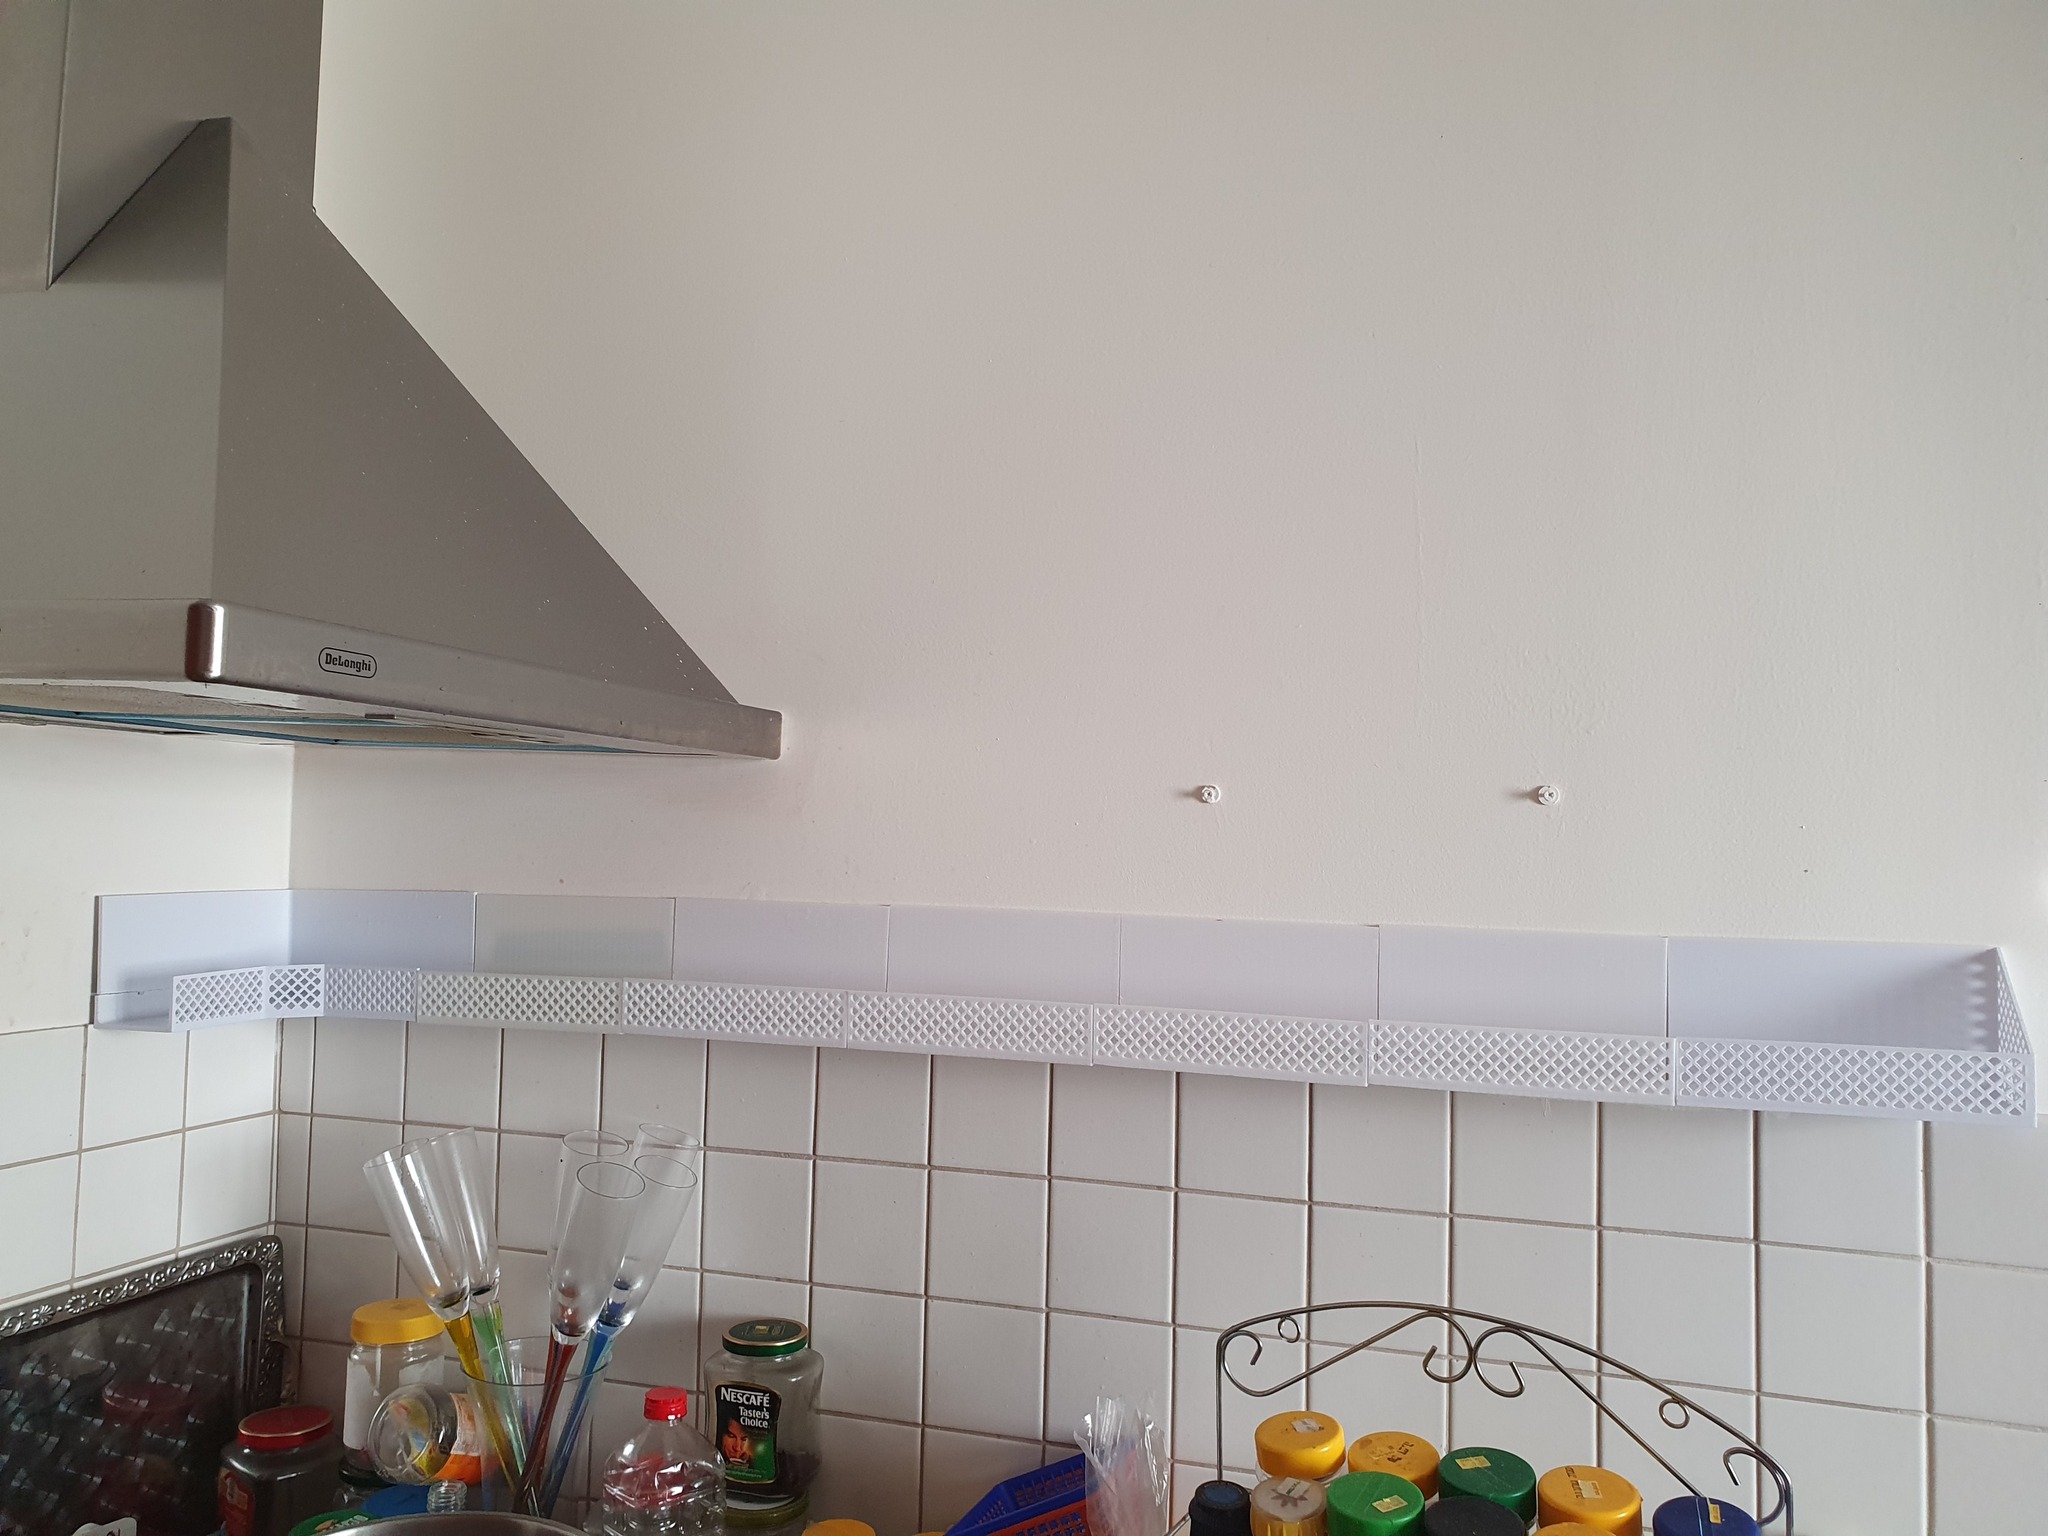 Wall mounted spice rack - middle